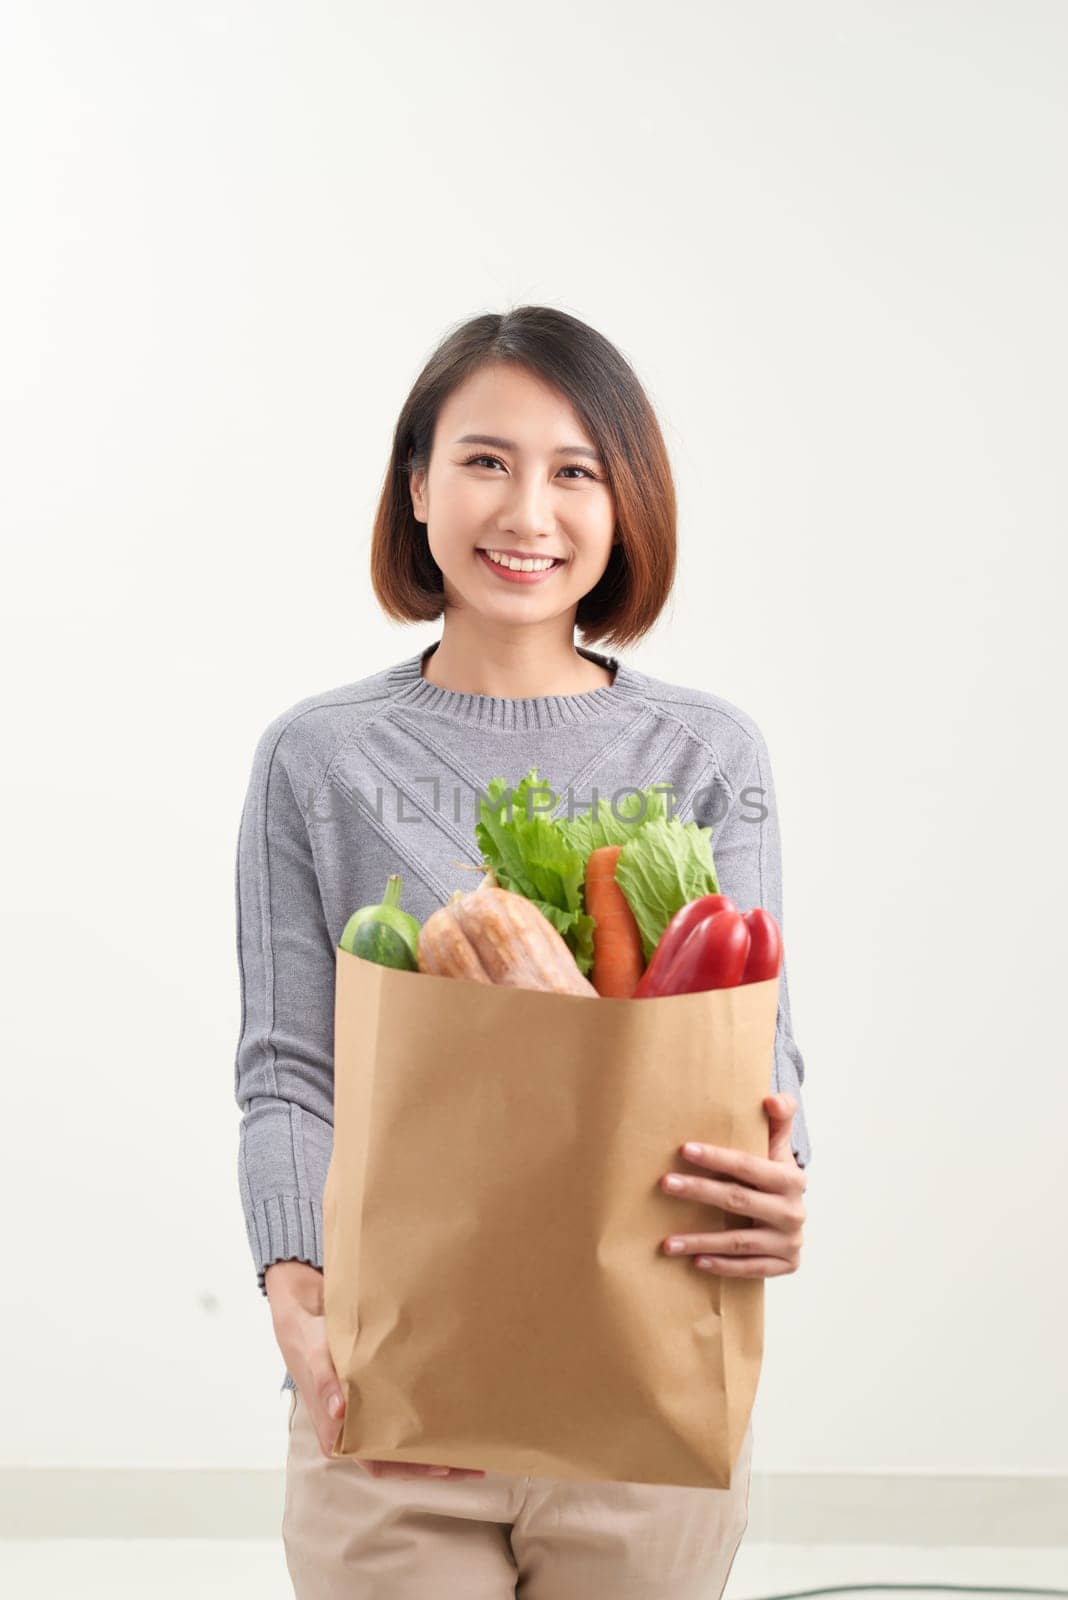 Beautiful smiling Asian woman holding paper shopping bag full of vegetables and groceries, studio shot isolated on white background